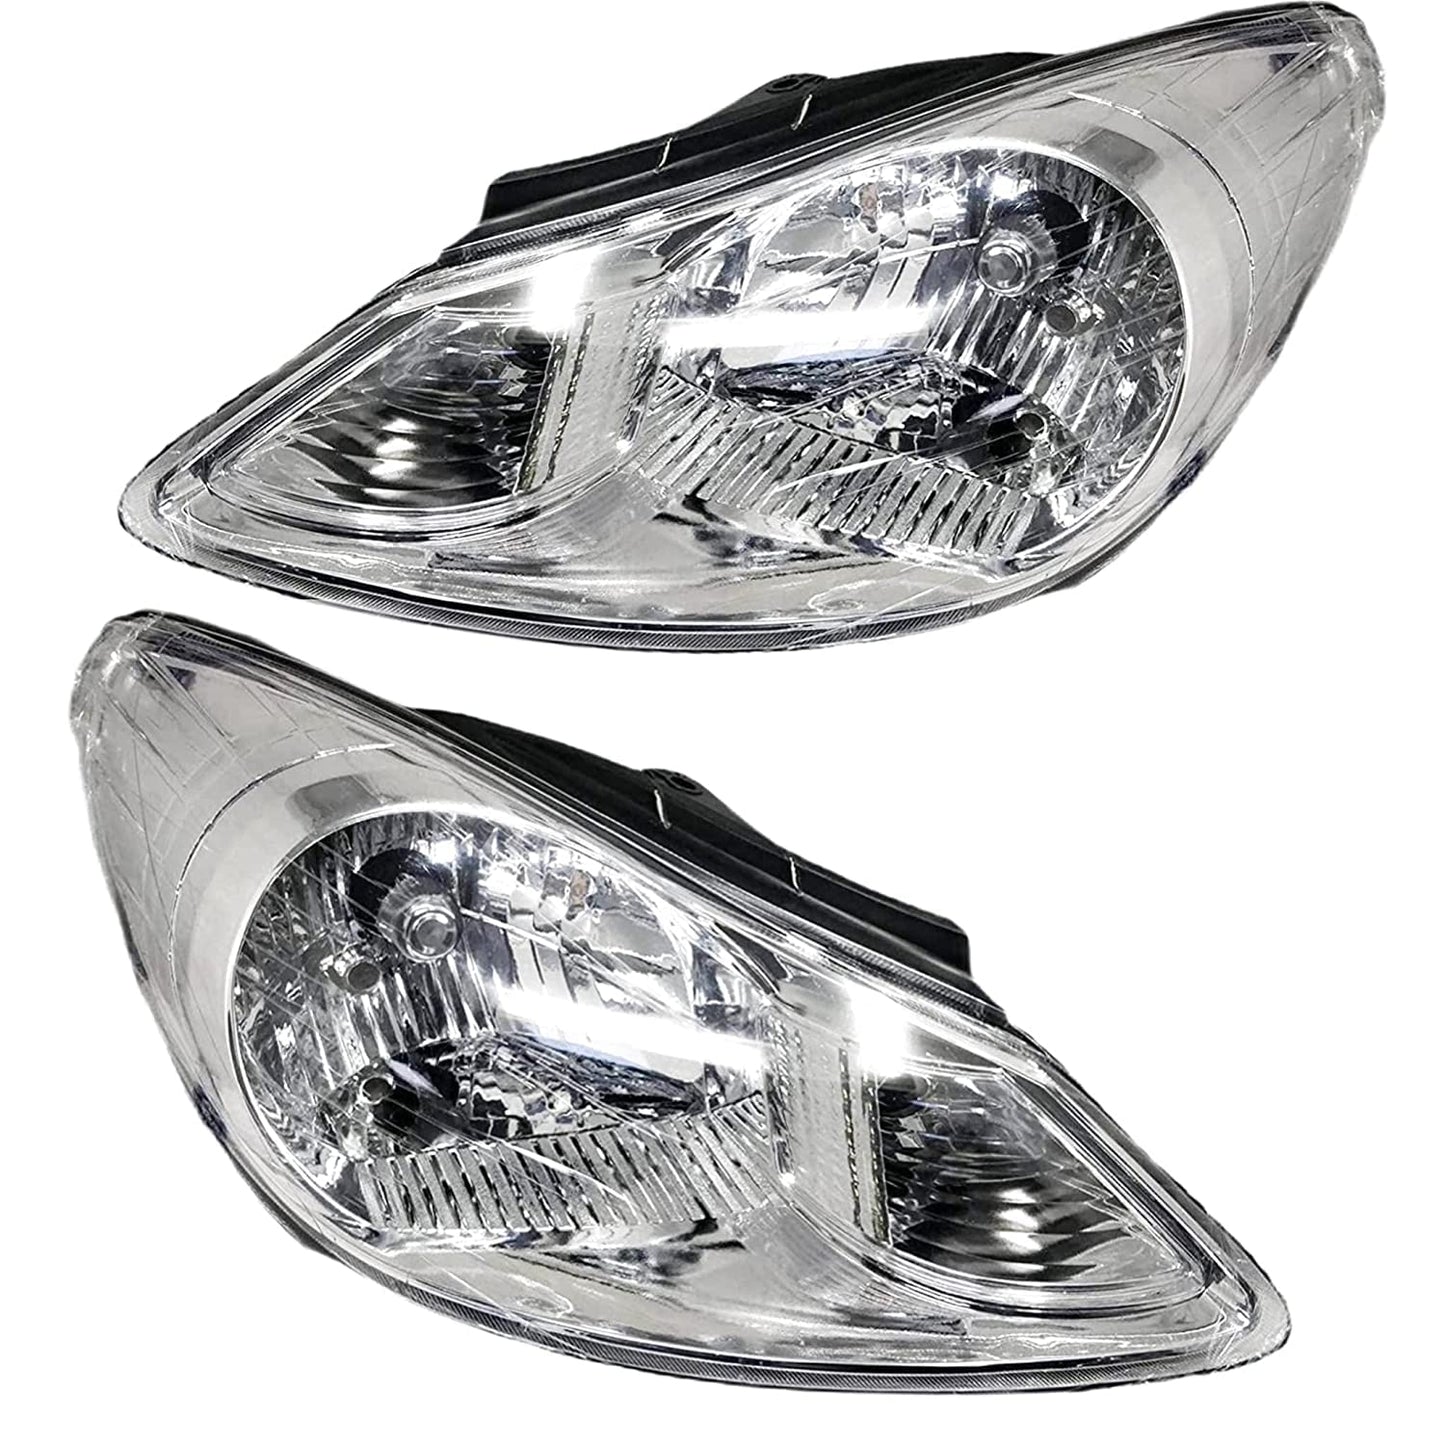 Headlight assembly for Hyundai I10 Type1 Old model (Right & Left Side) 2007-2010 Pair